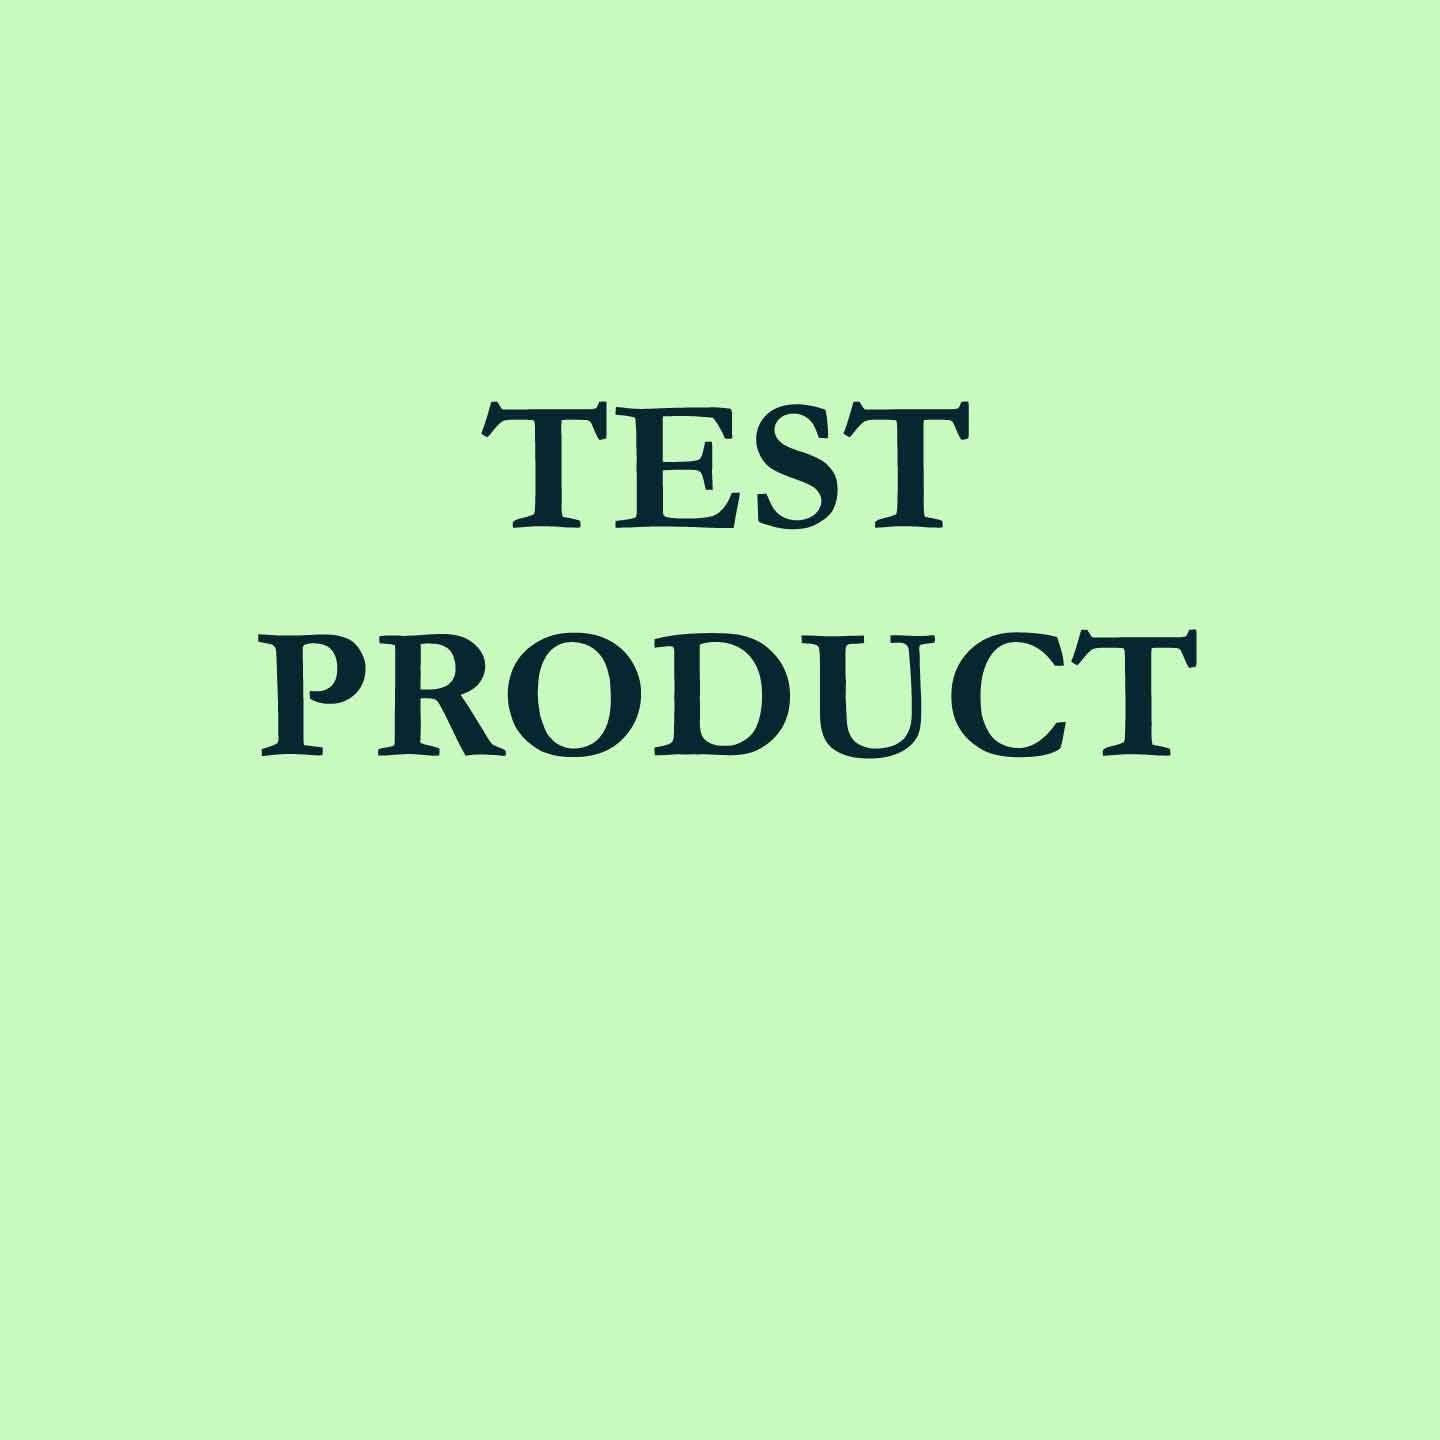 Test Product - For testing ONLY